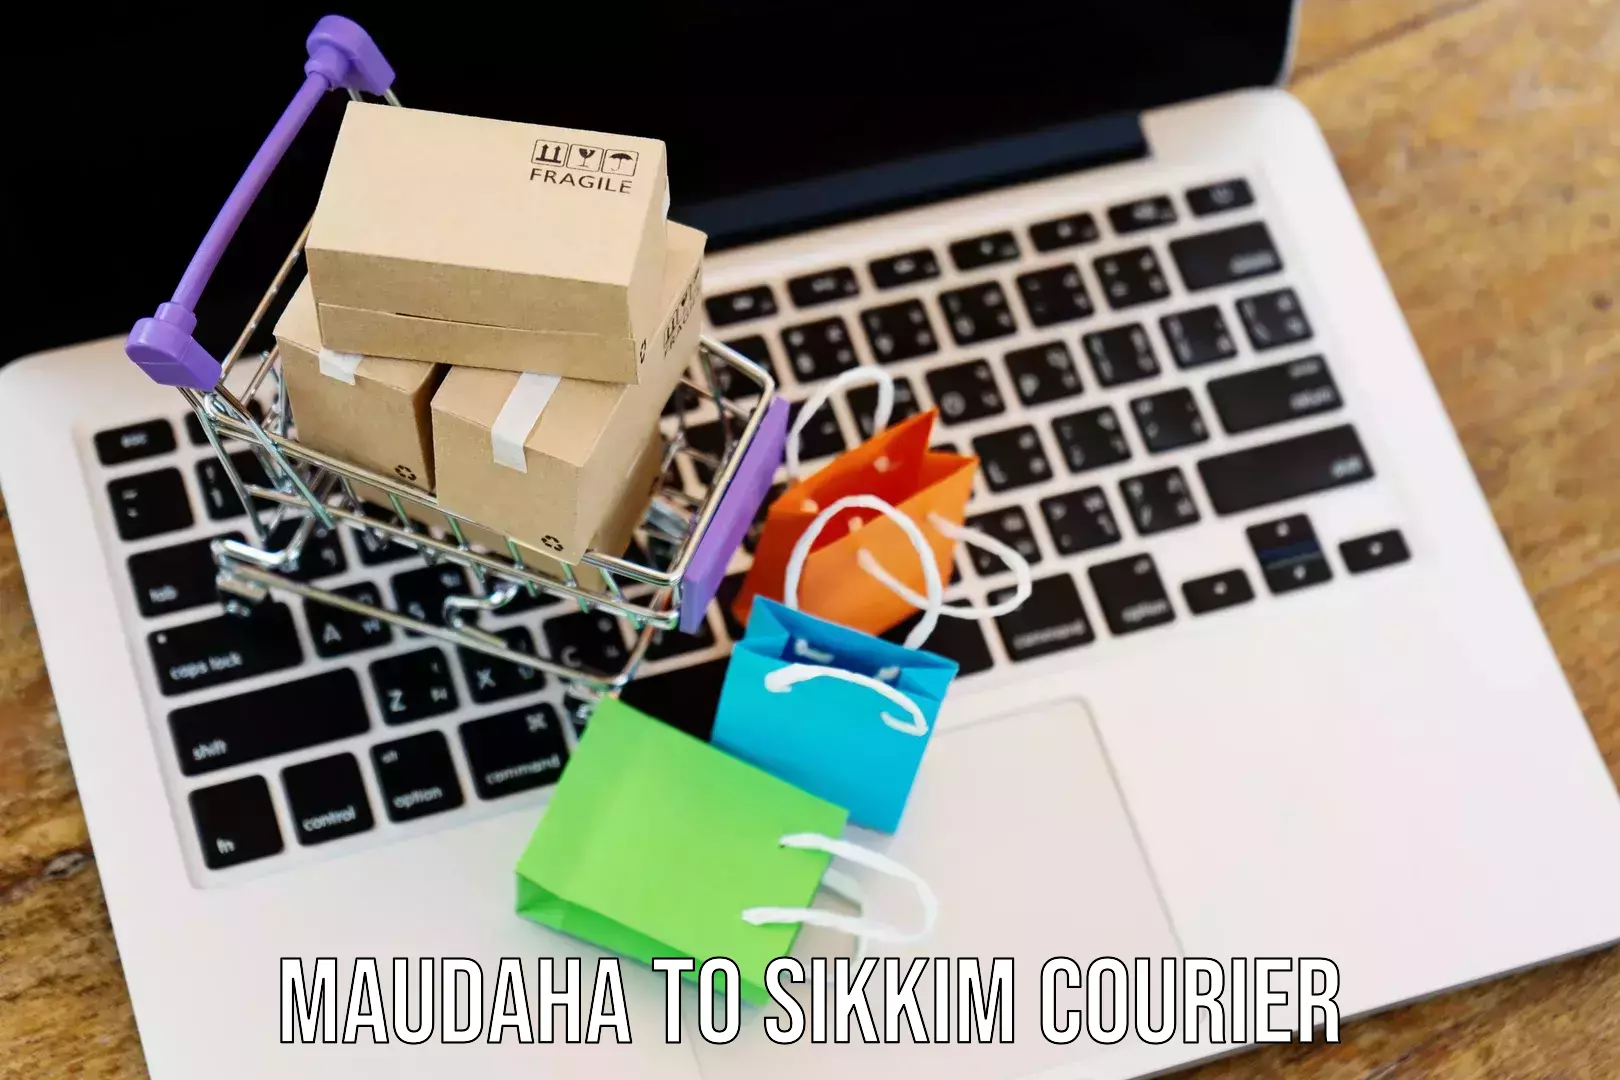 24/7 courier service Maudaha to North Sikkim